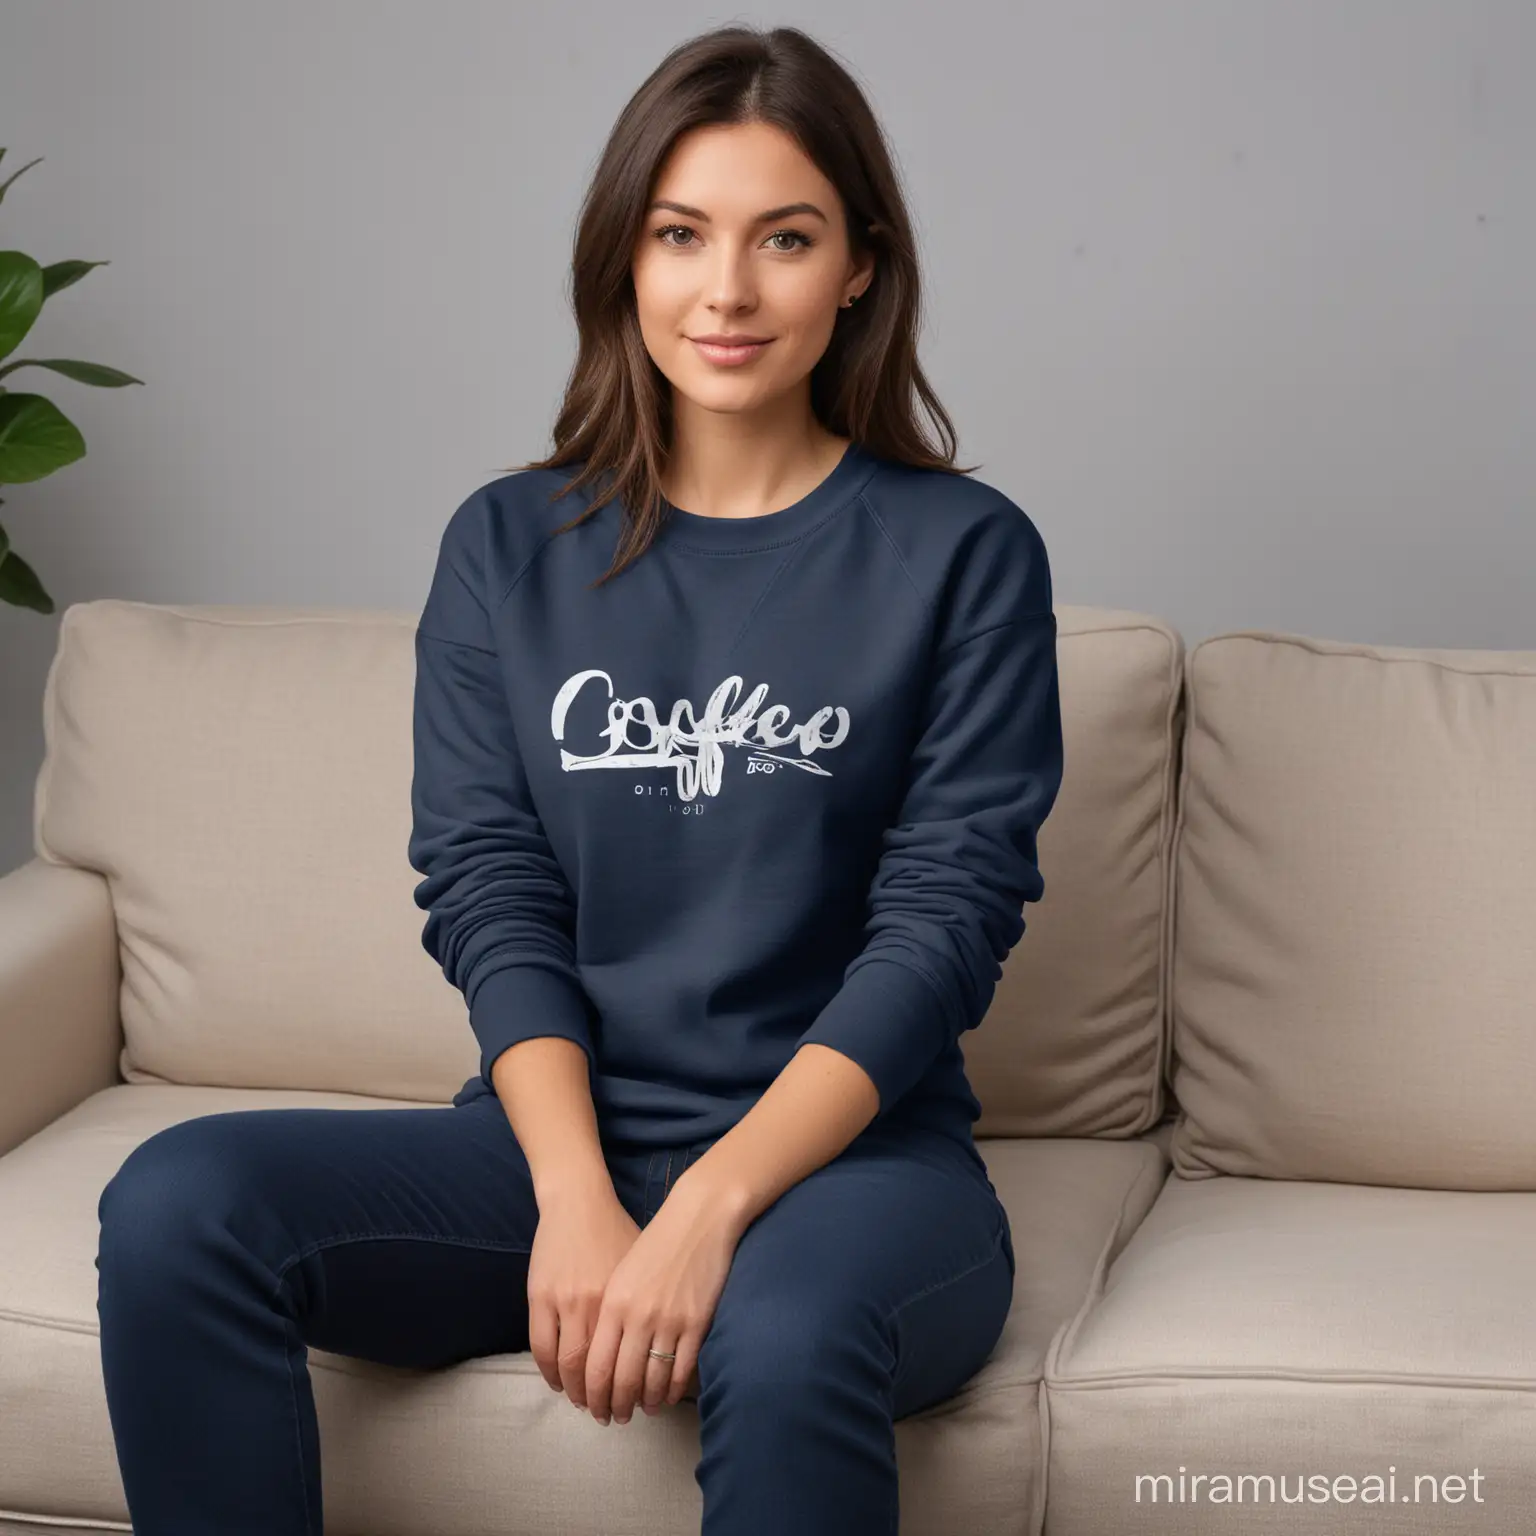 Ladies Relaxing in Navy Sweatshirt Mockup with Coffee on Couch